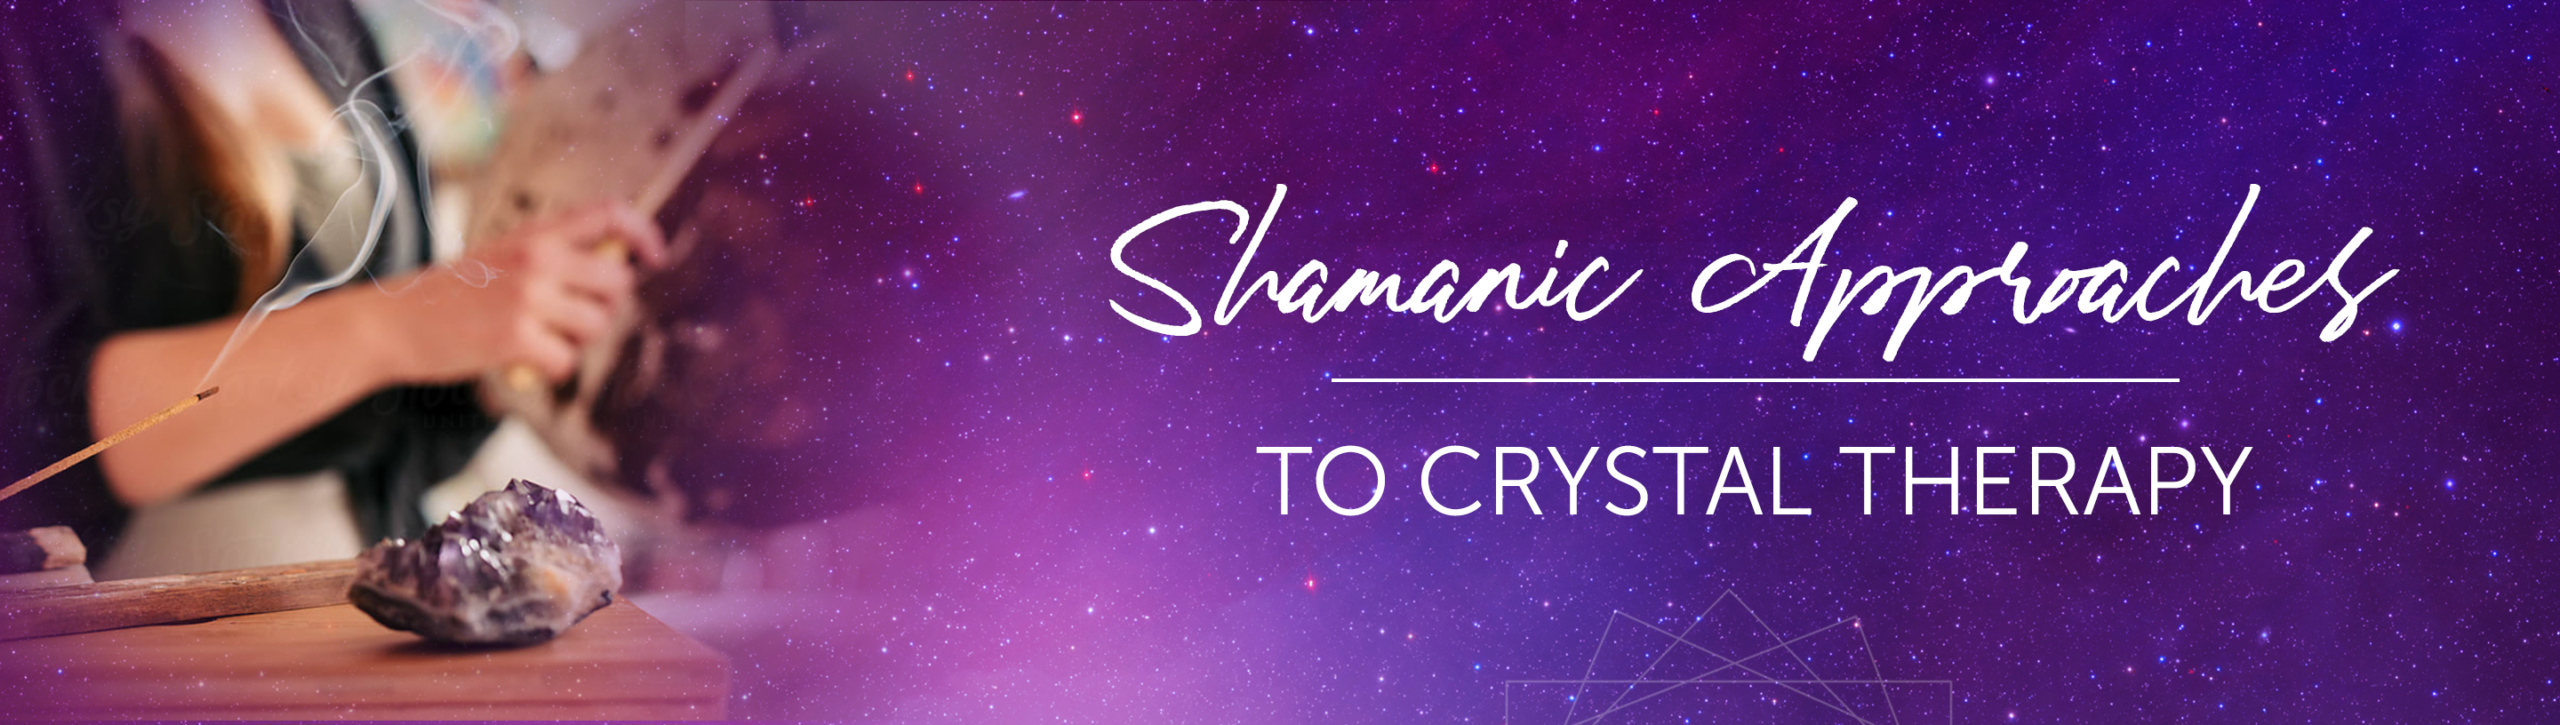 Shamanistic Approaches to Crystal Therapy